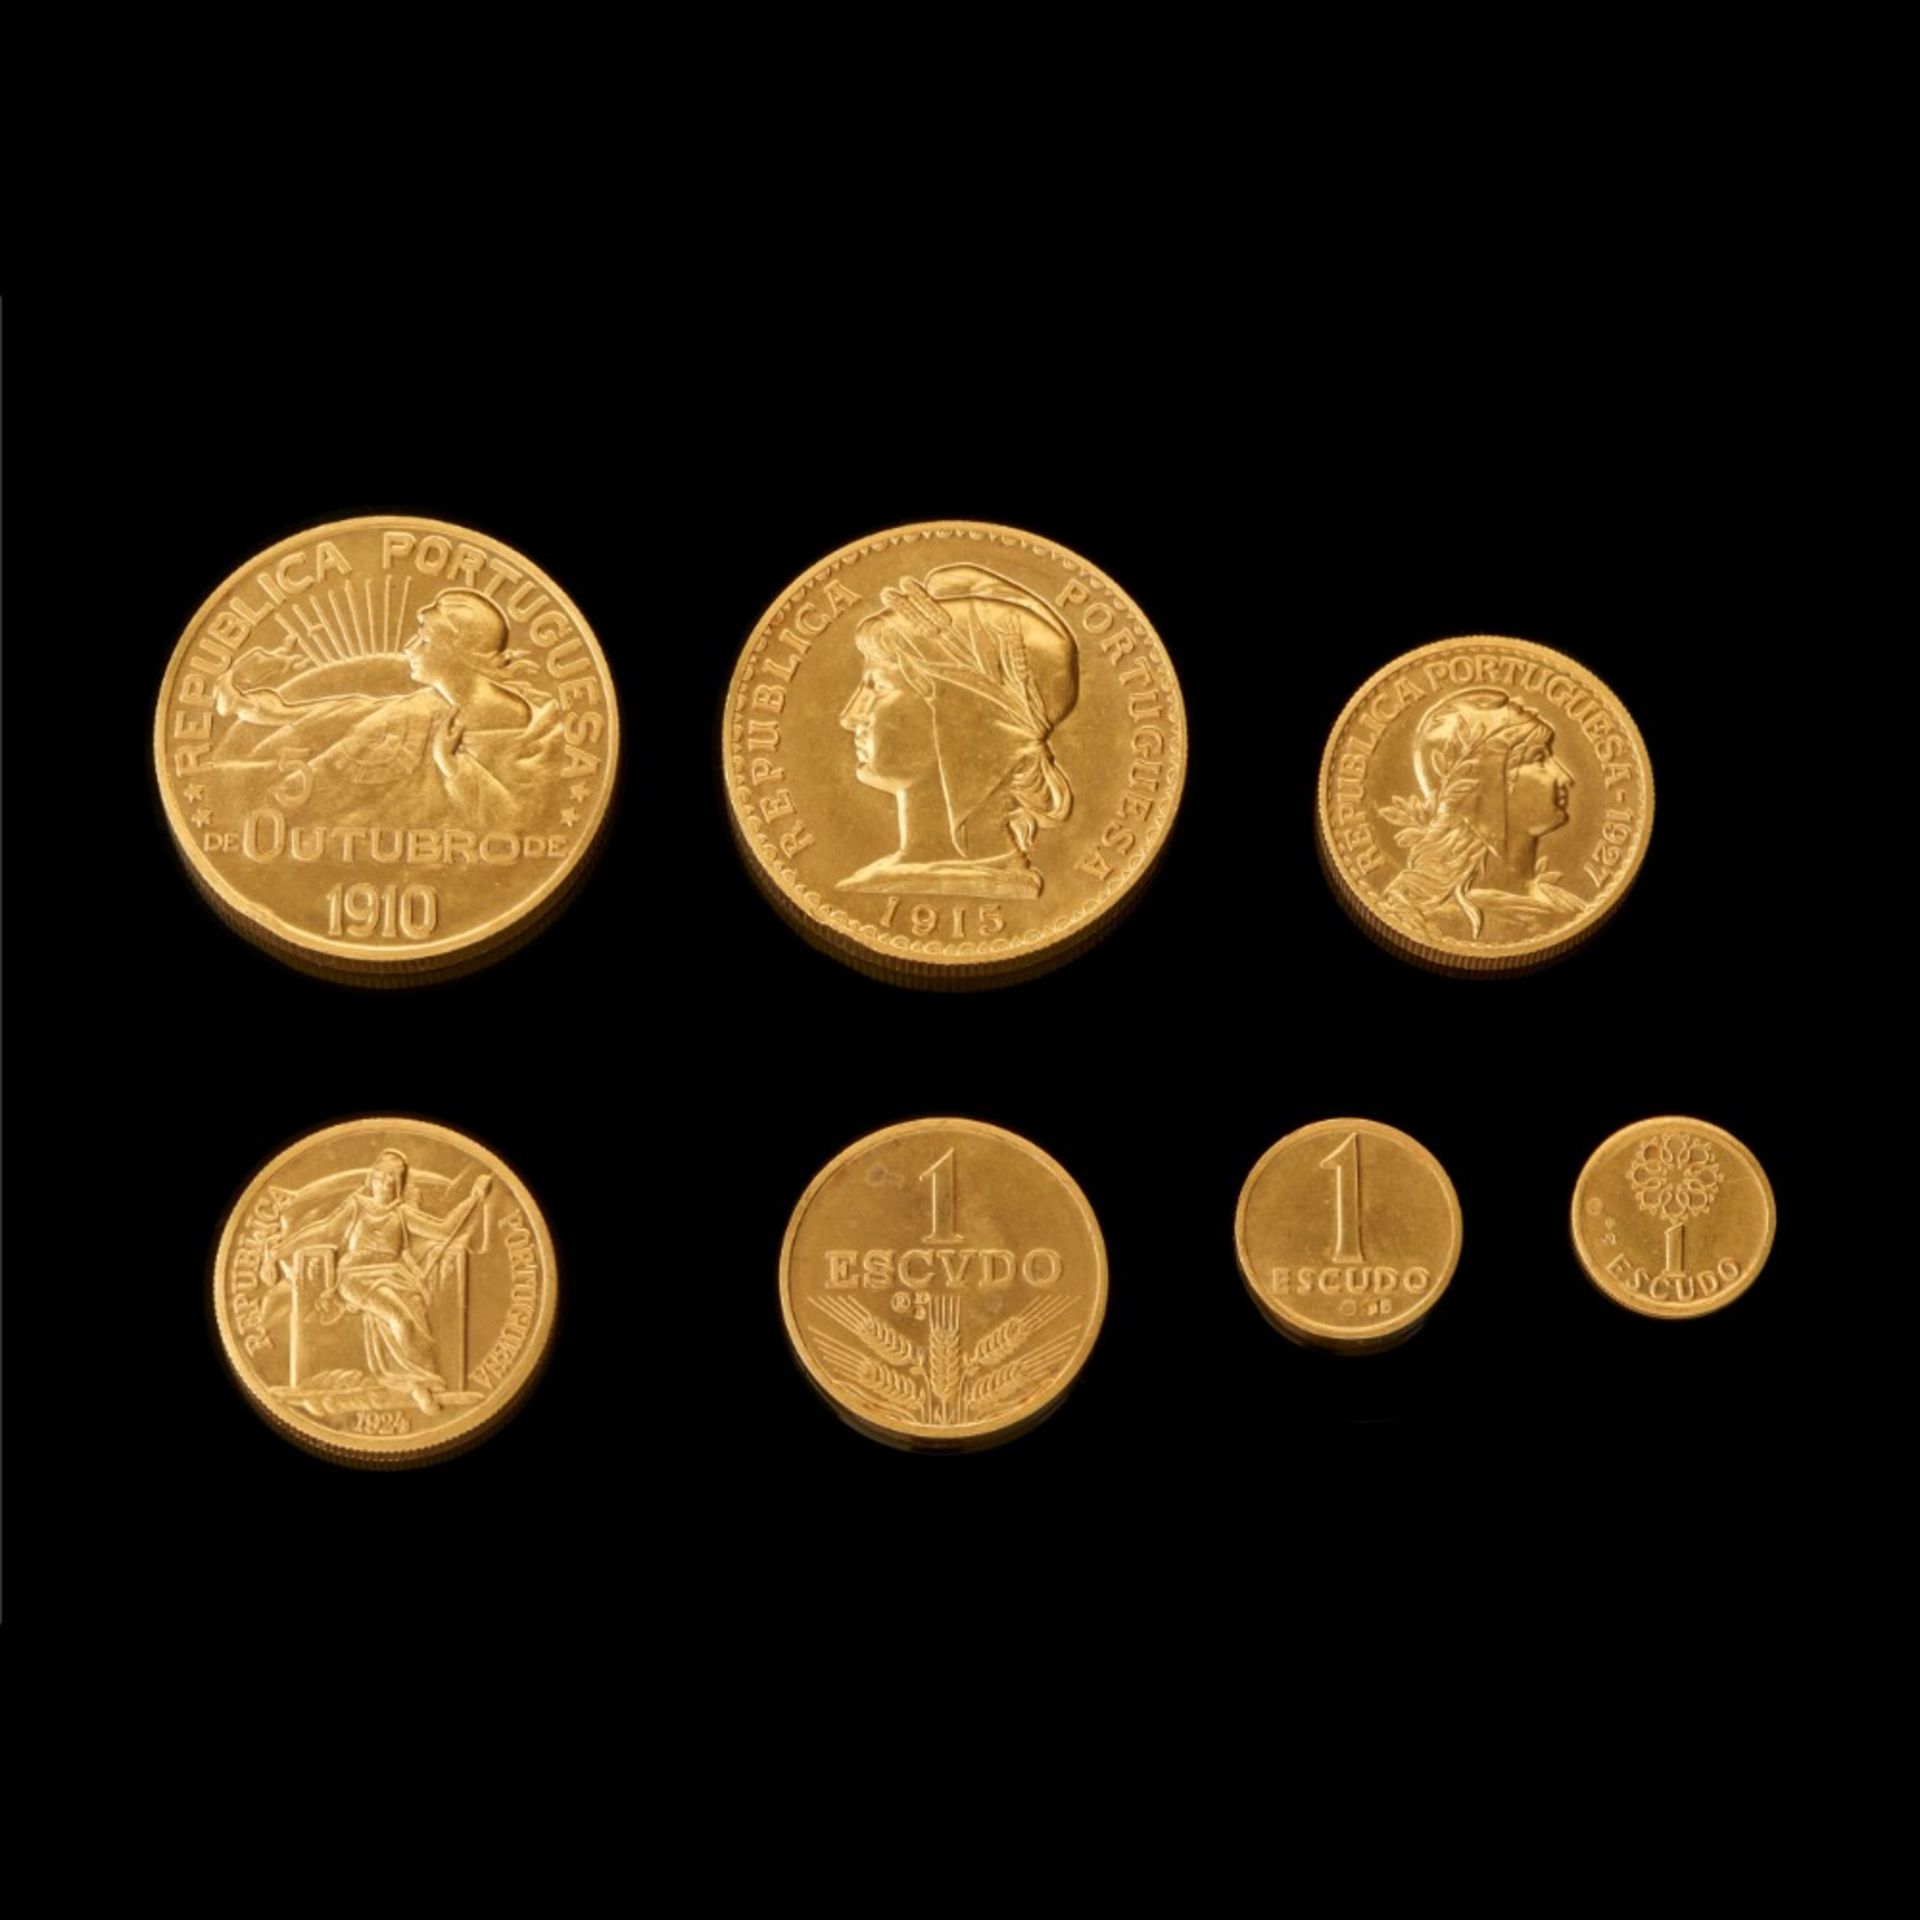  A "One Escudo coins from the Republic" medal collection